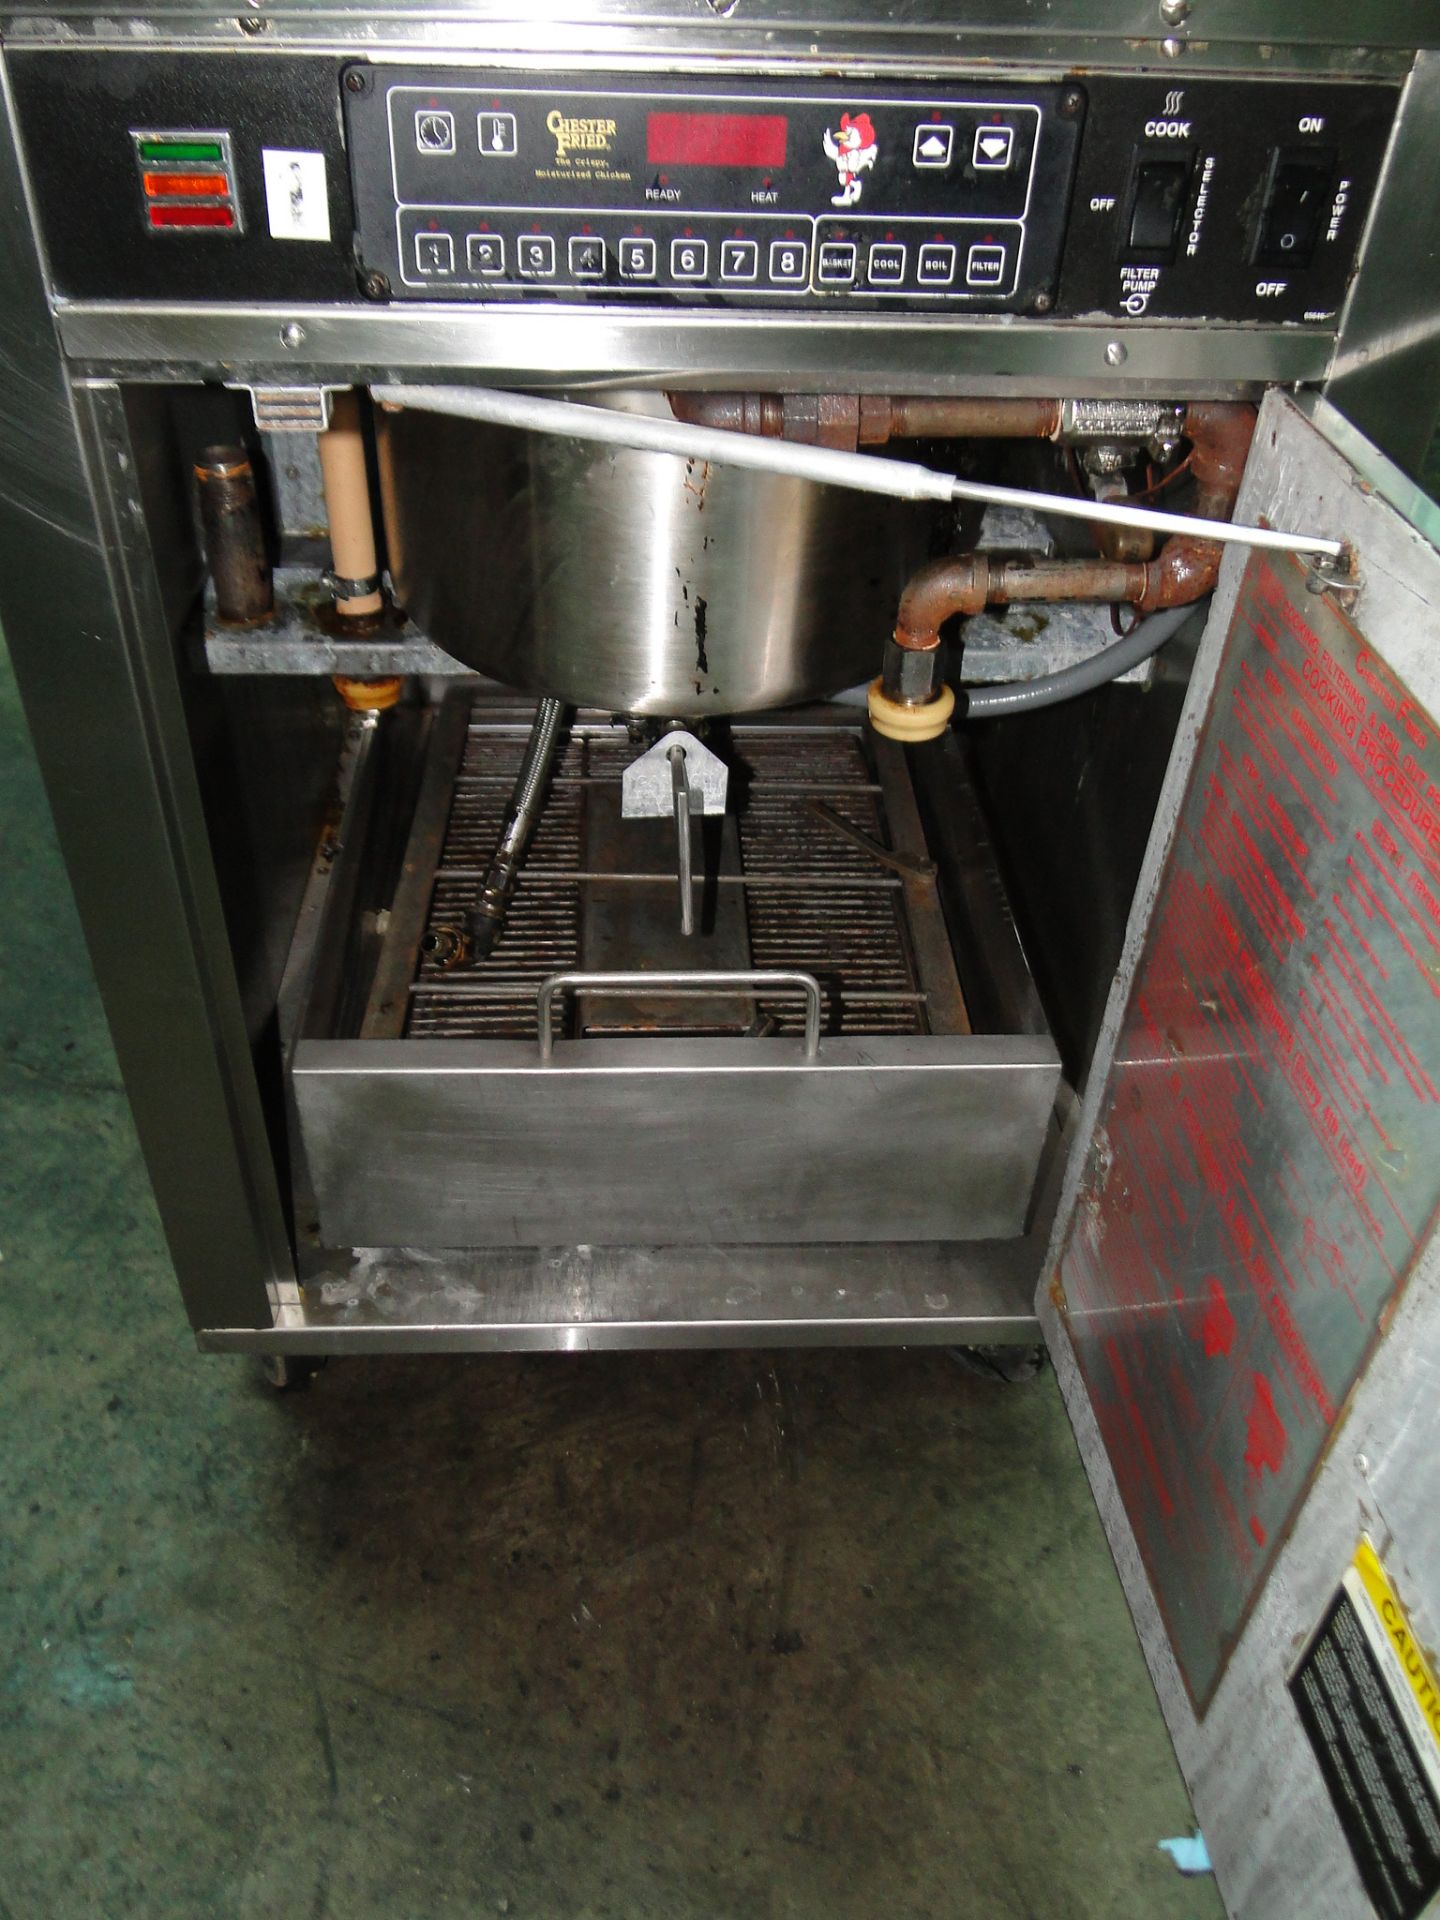 Giles "Chester Fried" Gas Fired Deep Fryer with Auto Lift, Model CF4006, S/N: A411070008, Equipped - Image 3 of 5